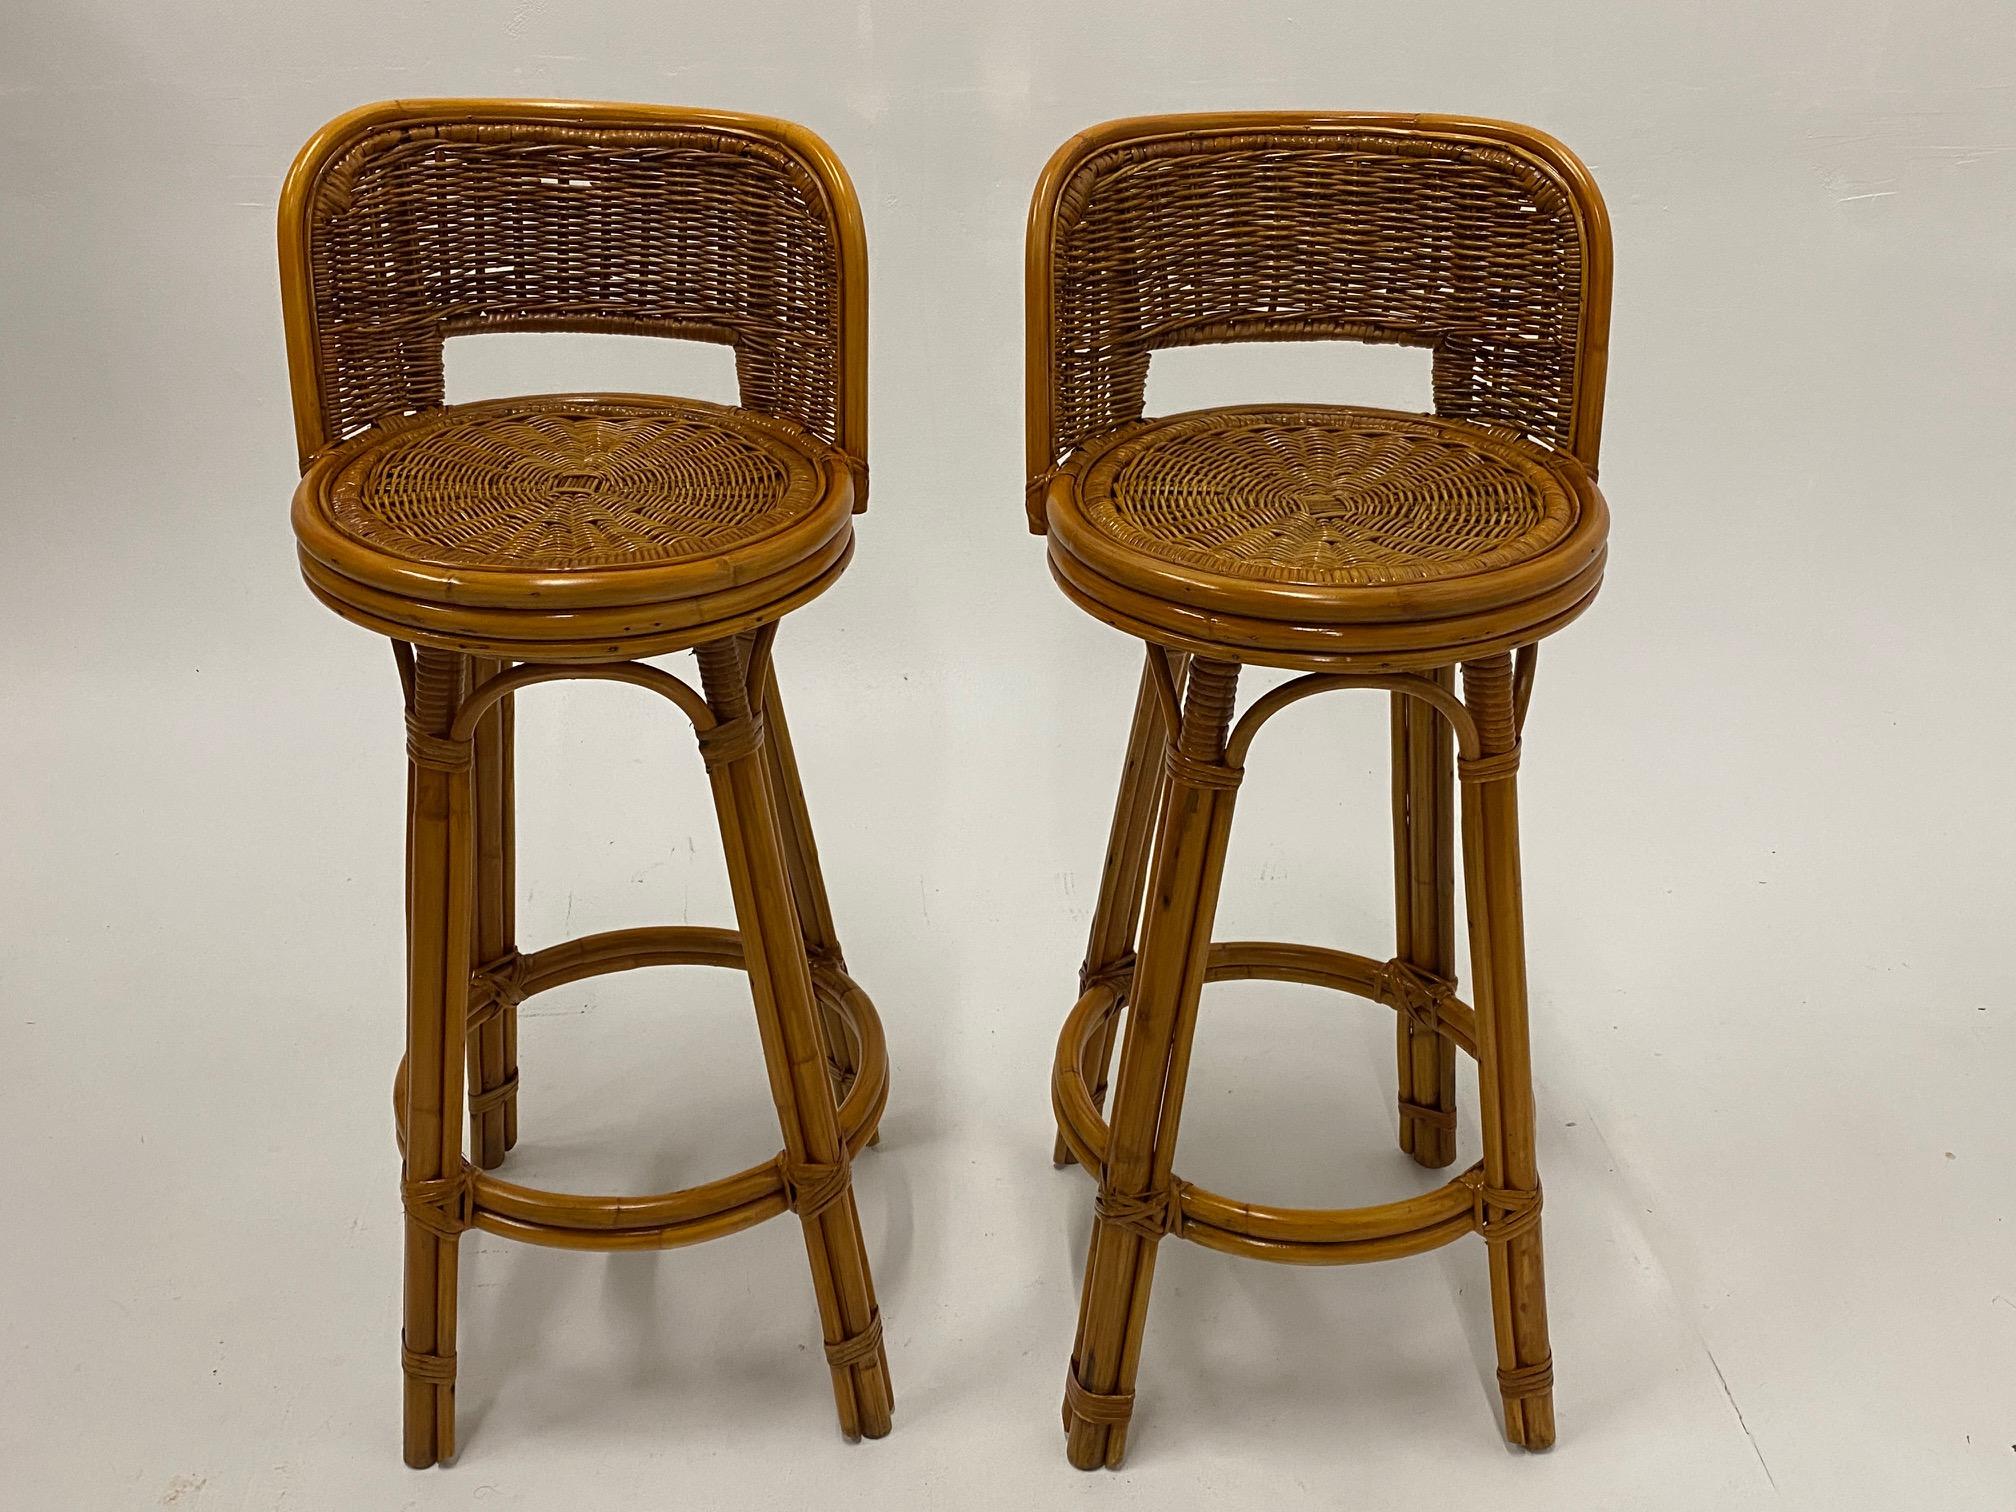 Handsome Pair of Mid-Century Modern Woven Rattan Barstools For Sale 2